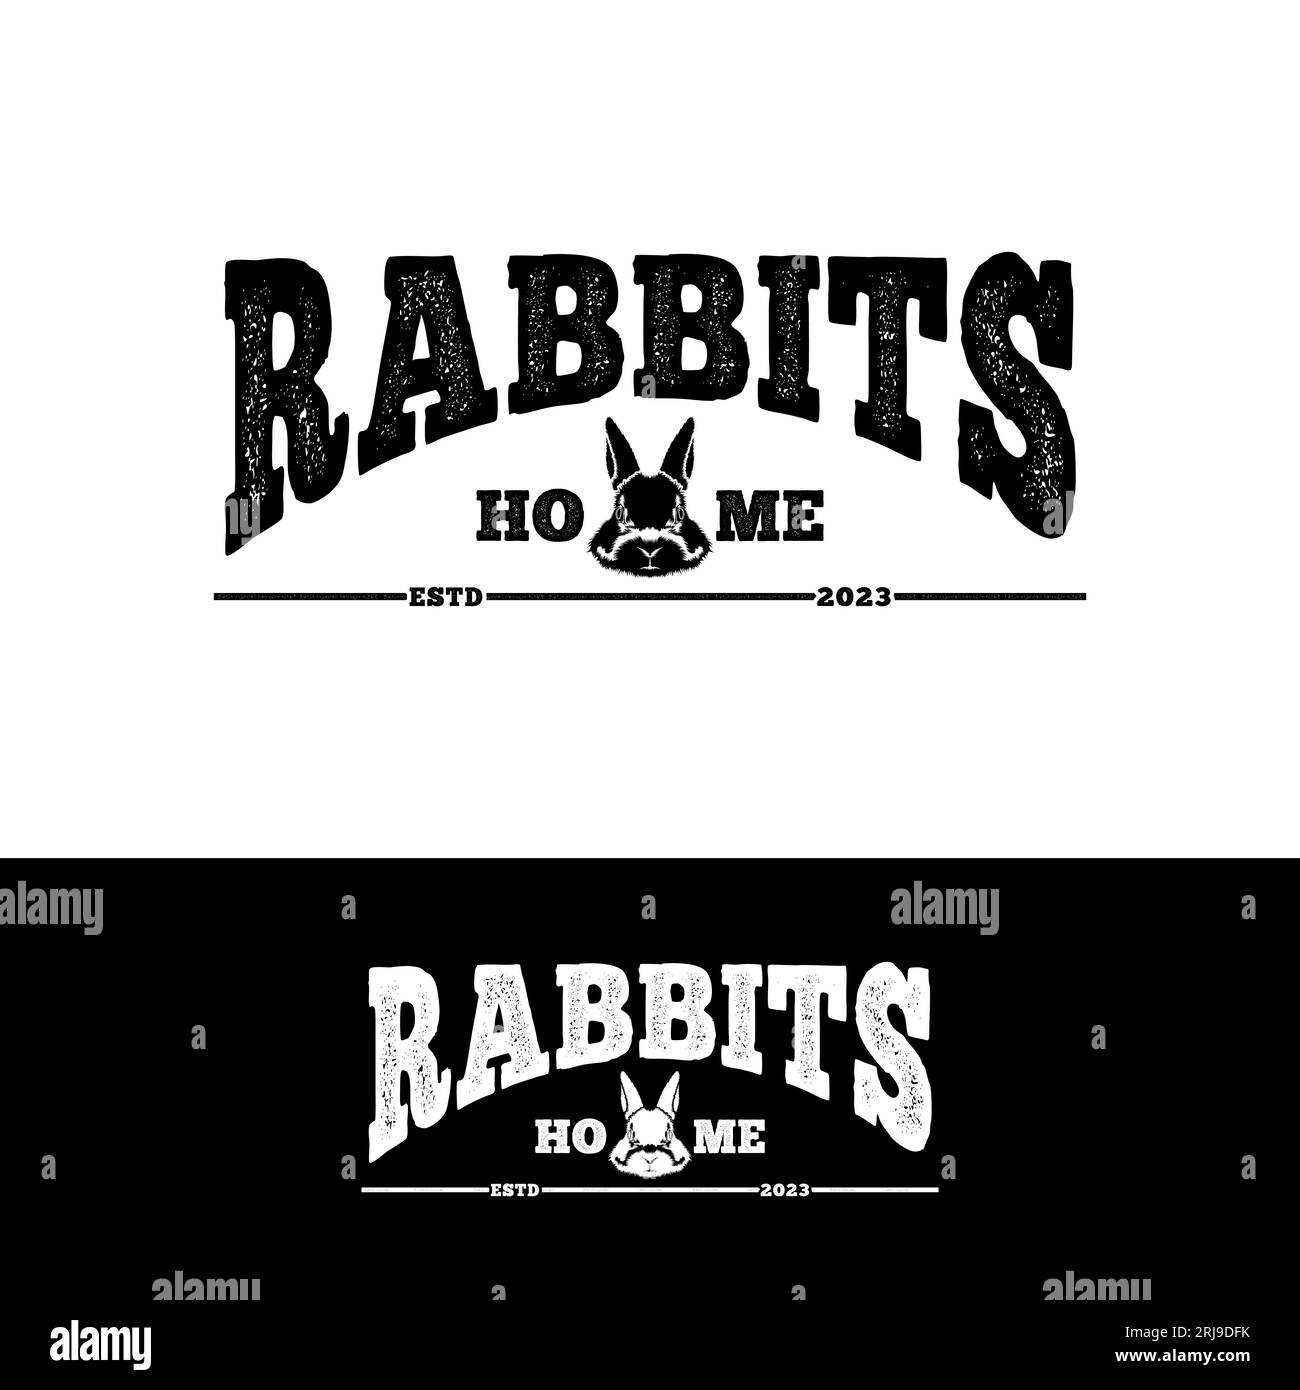 Rabbit House Typography With Rabbit Bunny Head For Rent House, Hotel, Clothing Brand, Animal Clinic, Veterinary Logo Design Stock Vector